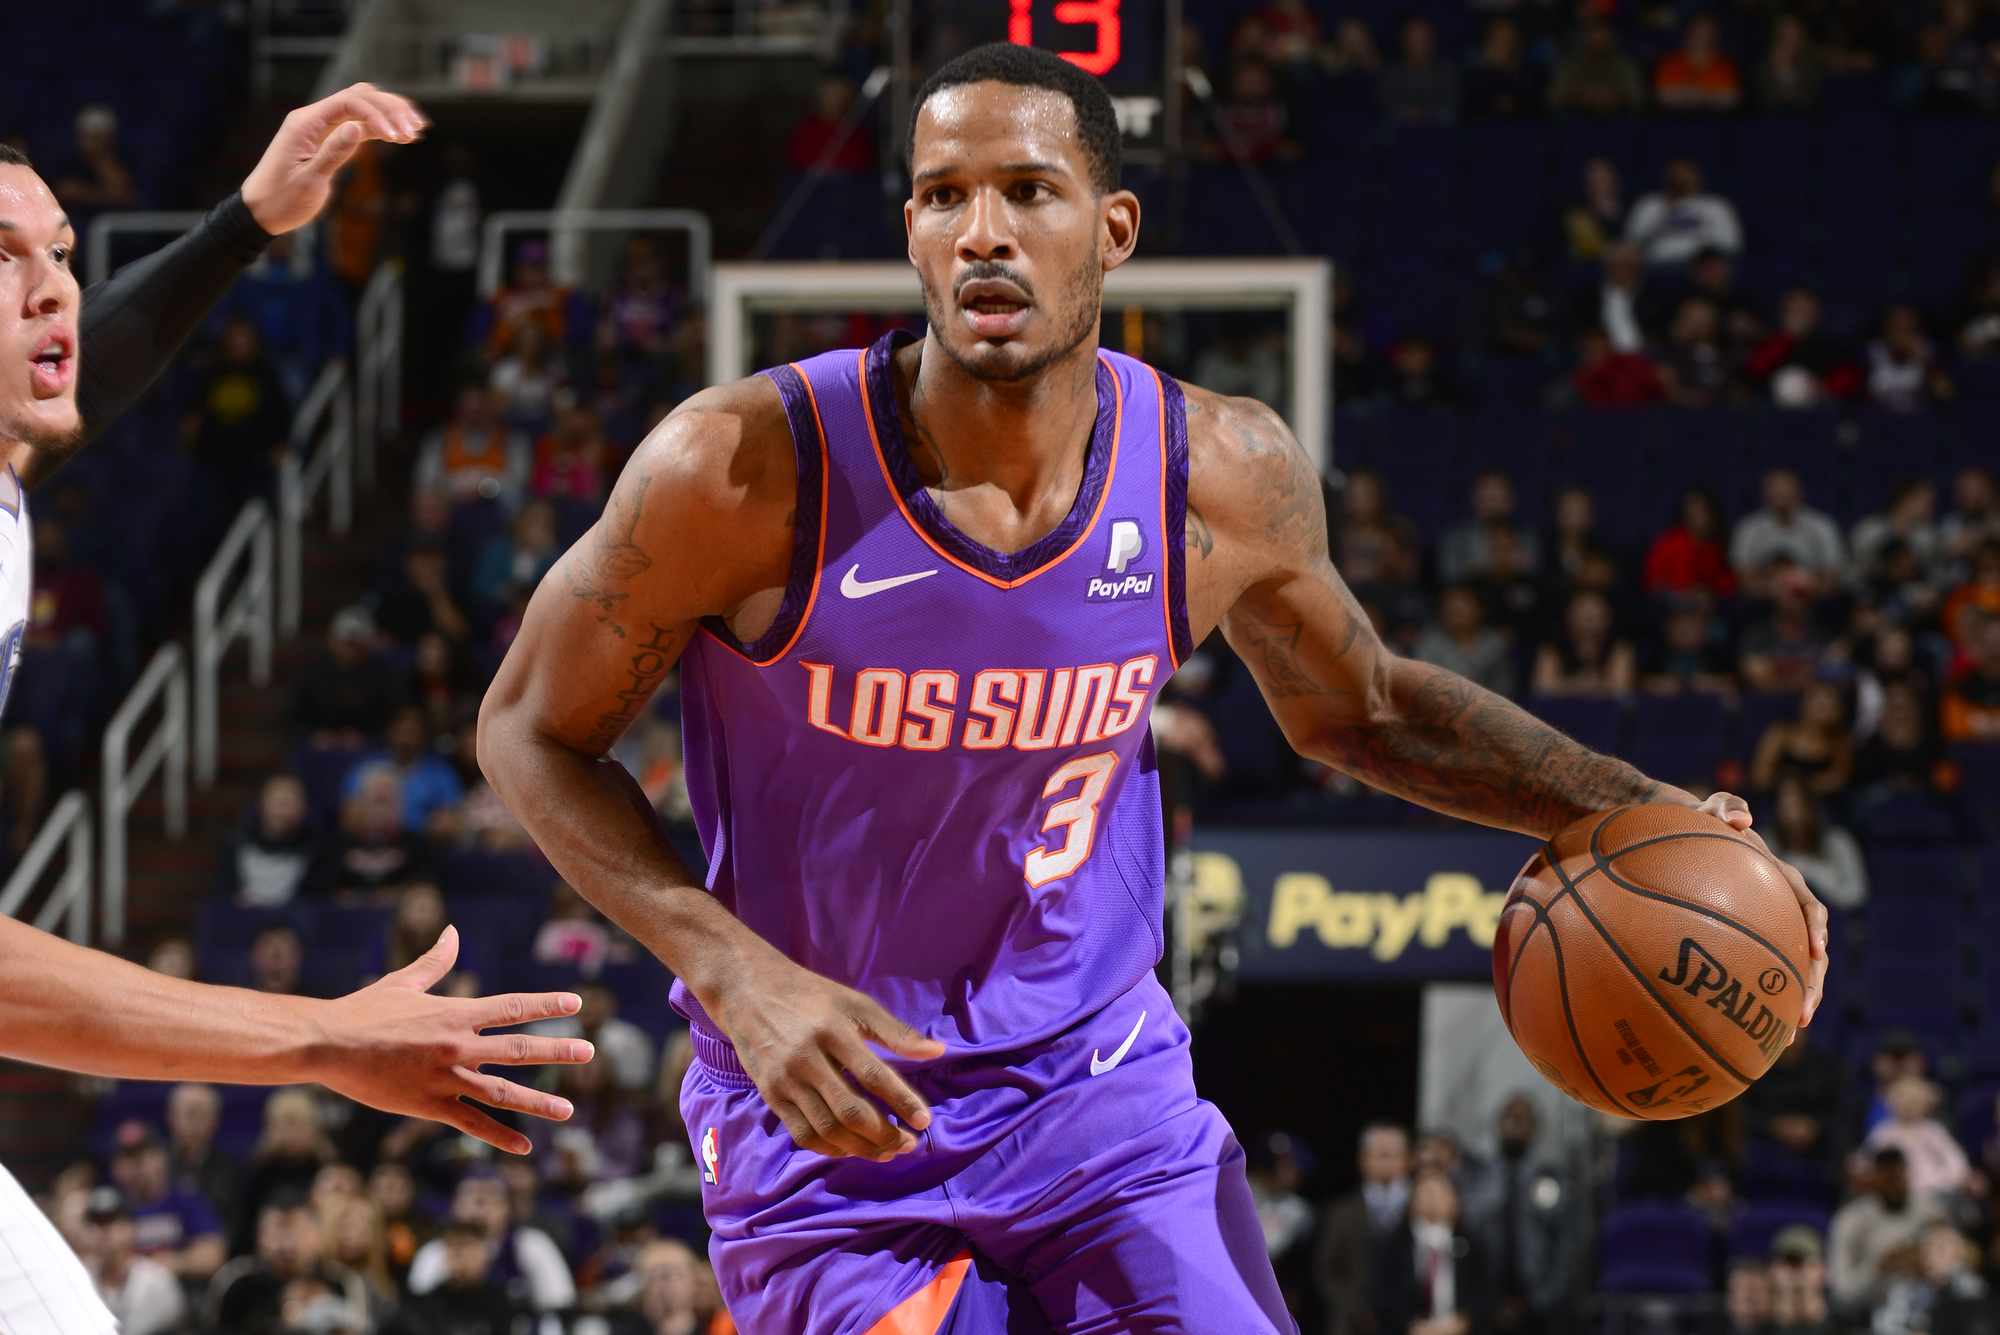 AP source: Wizards acquire Ariza from Suns for Oubre, Rivers